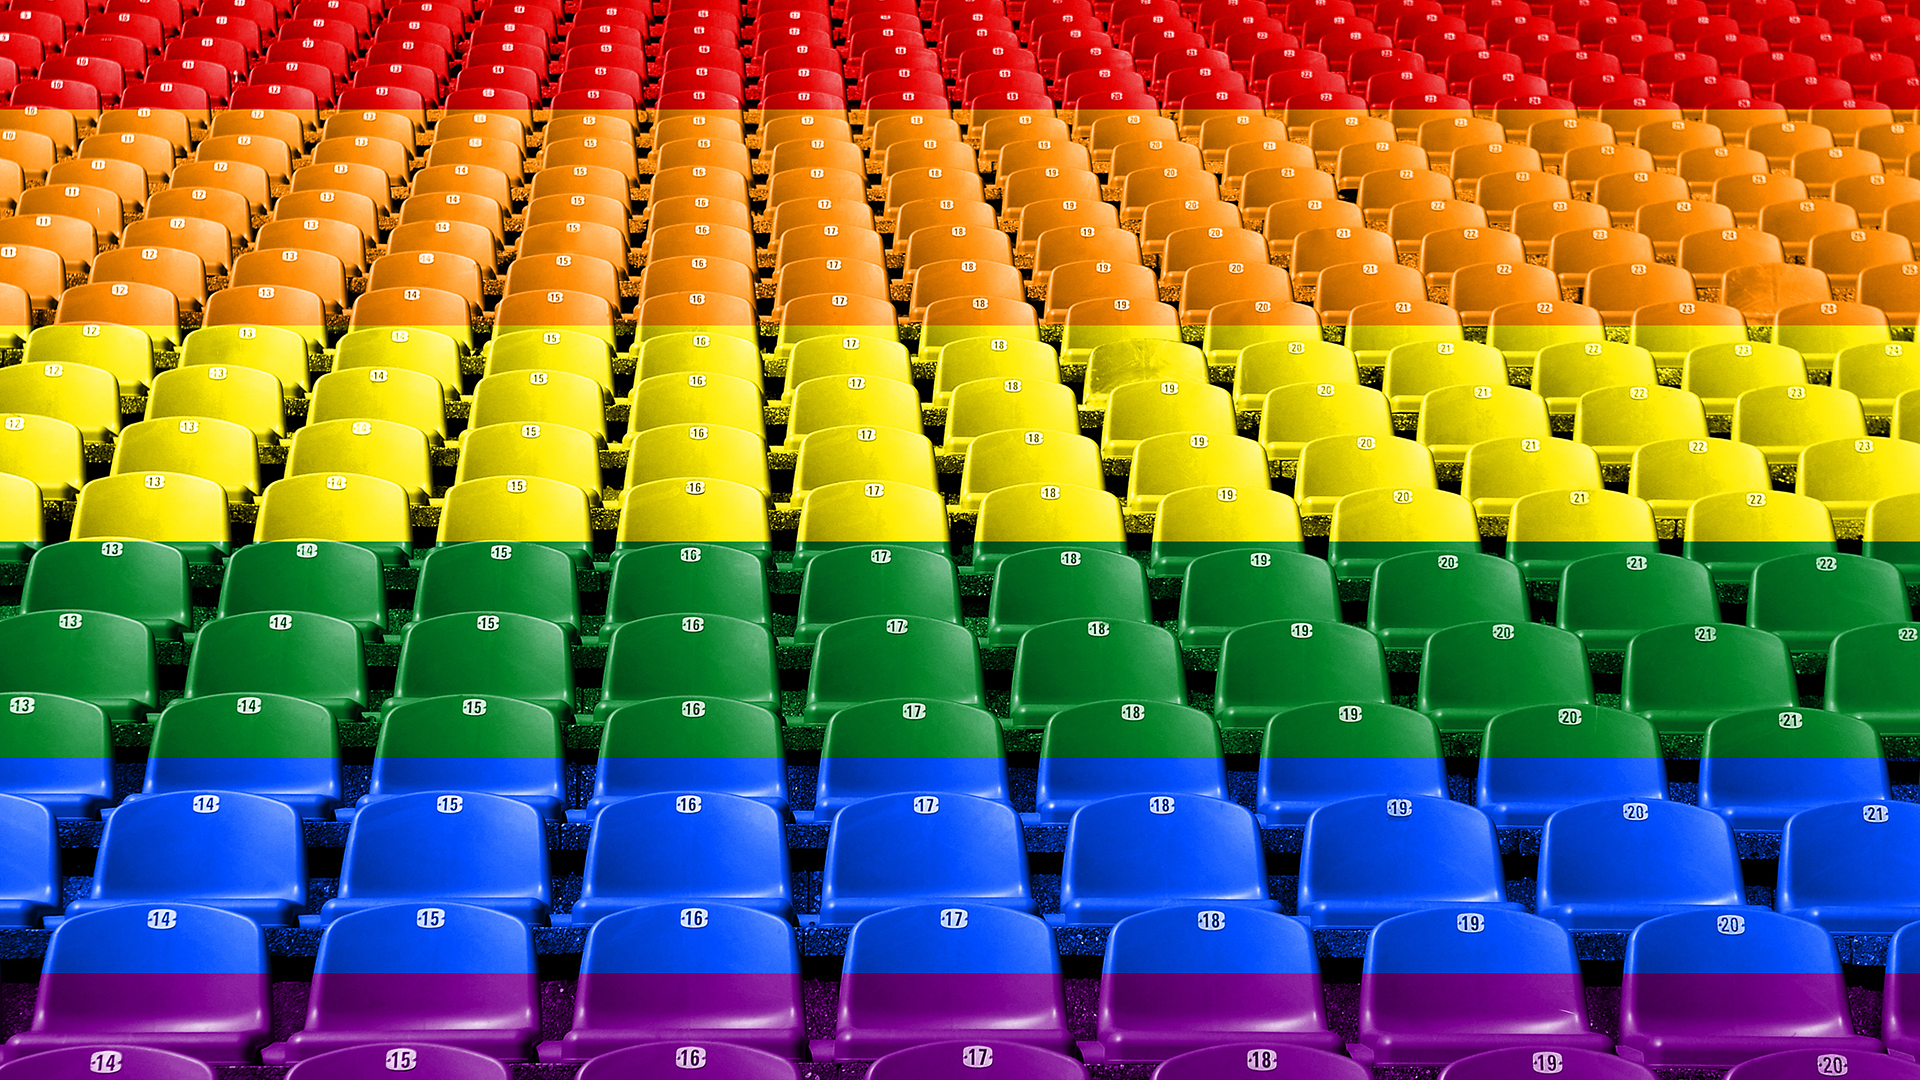 Rows of empty stadium seats in the colors of the rainbow Pride flag.